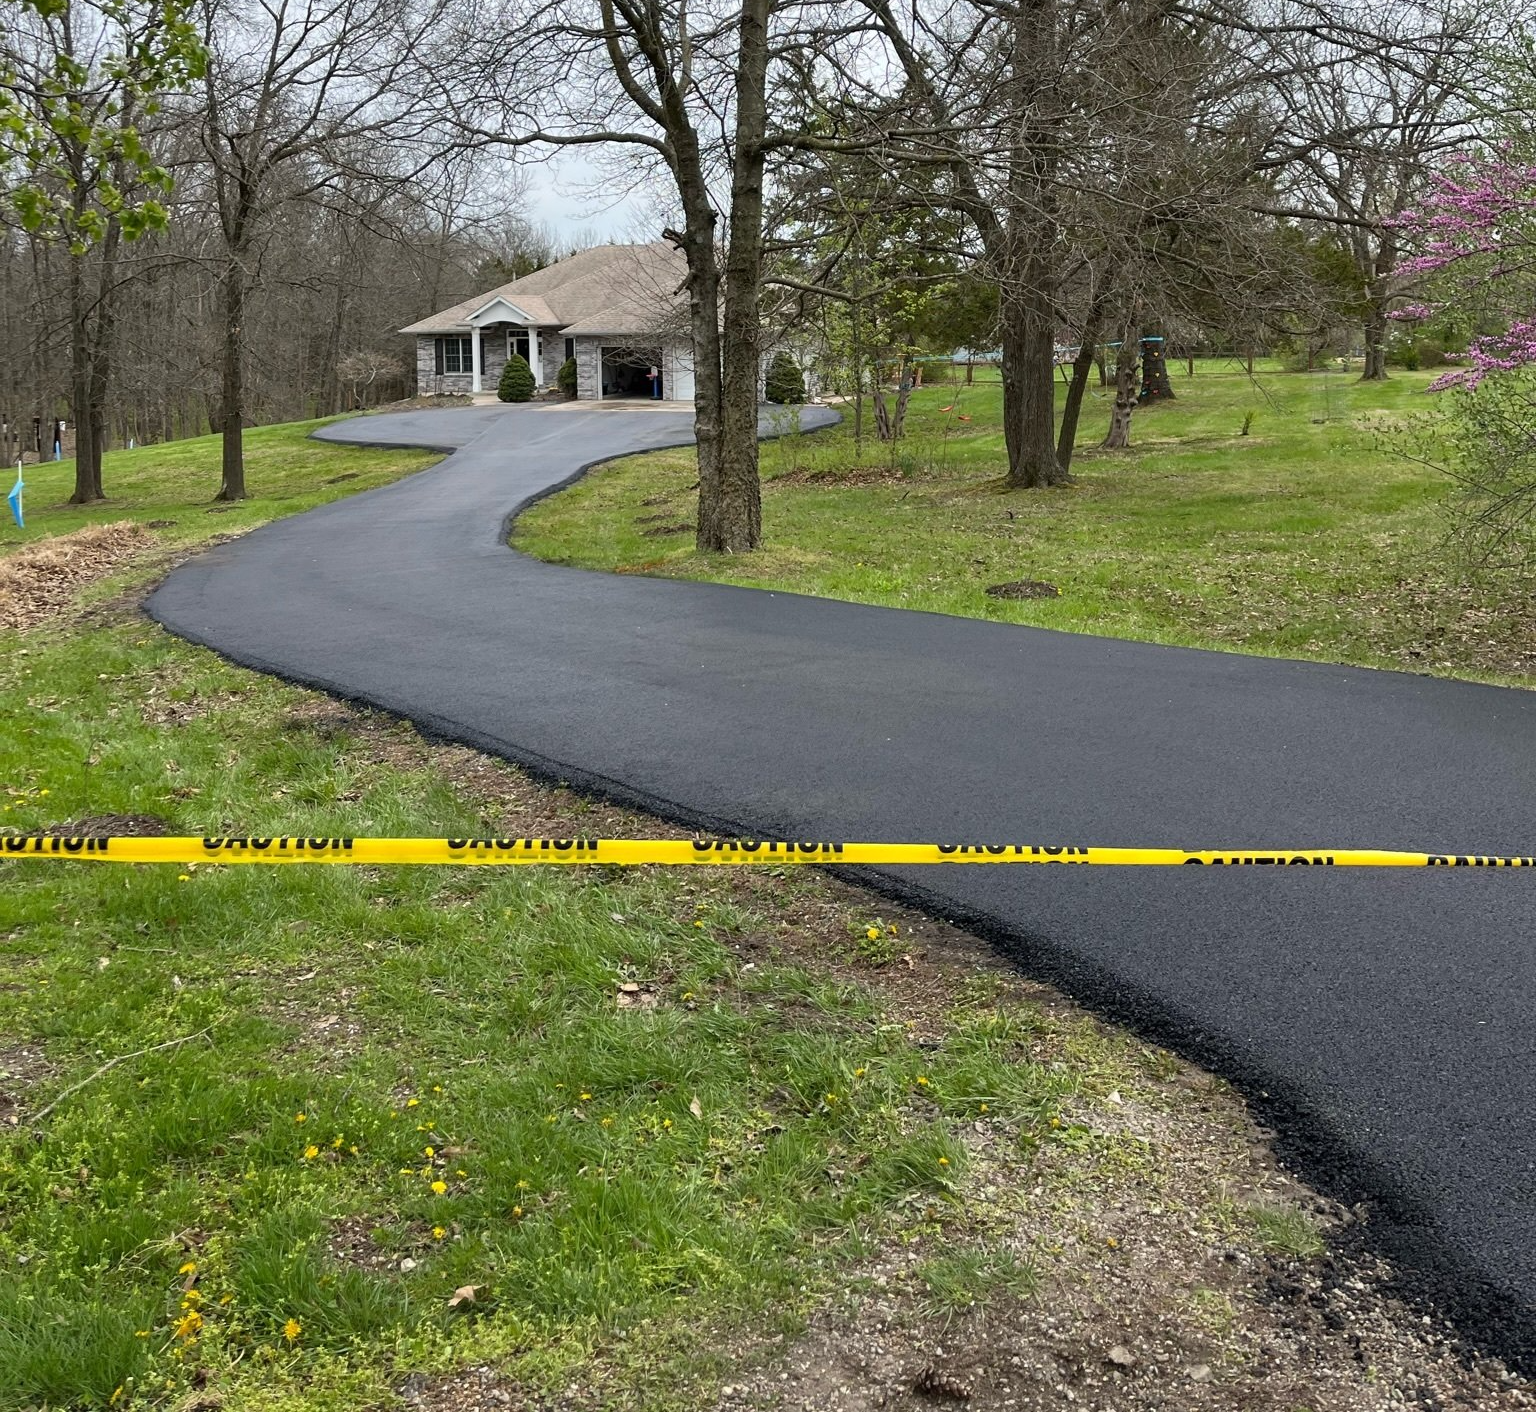 Don’t Let an Ugly Driveway Impact Your Fulton, MO Home’s Curb Appeal. MoSEAL Can Help You Pave Today